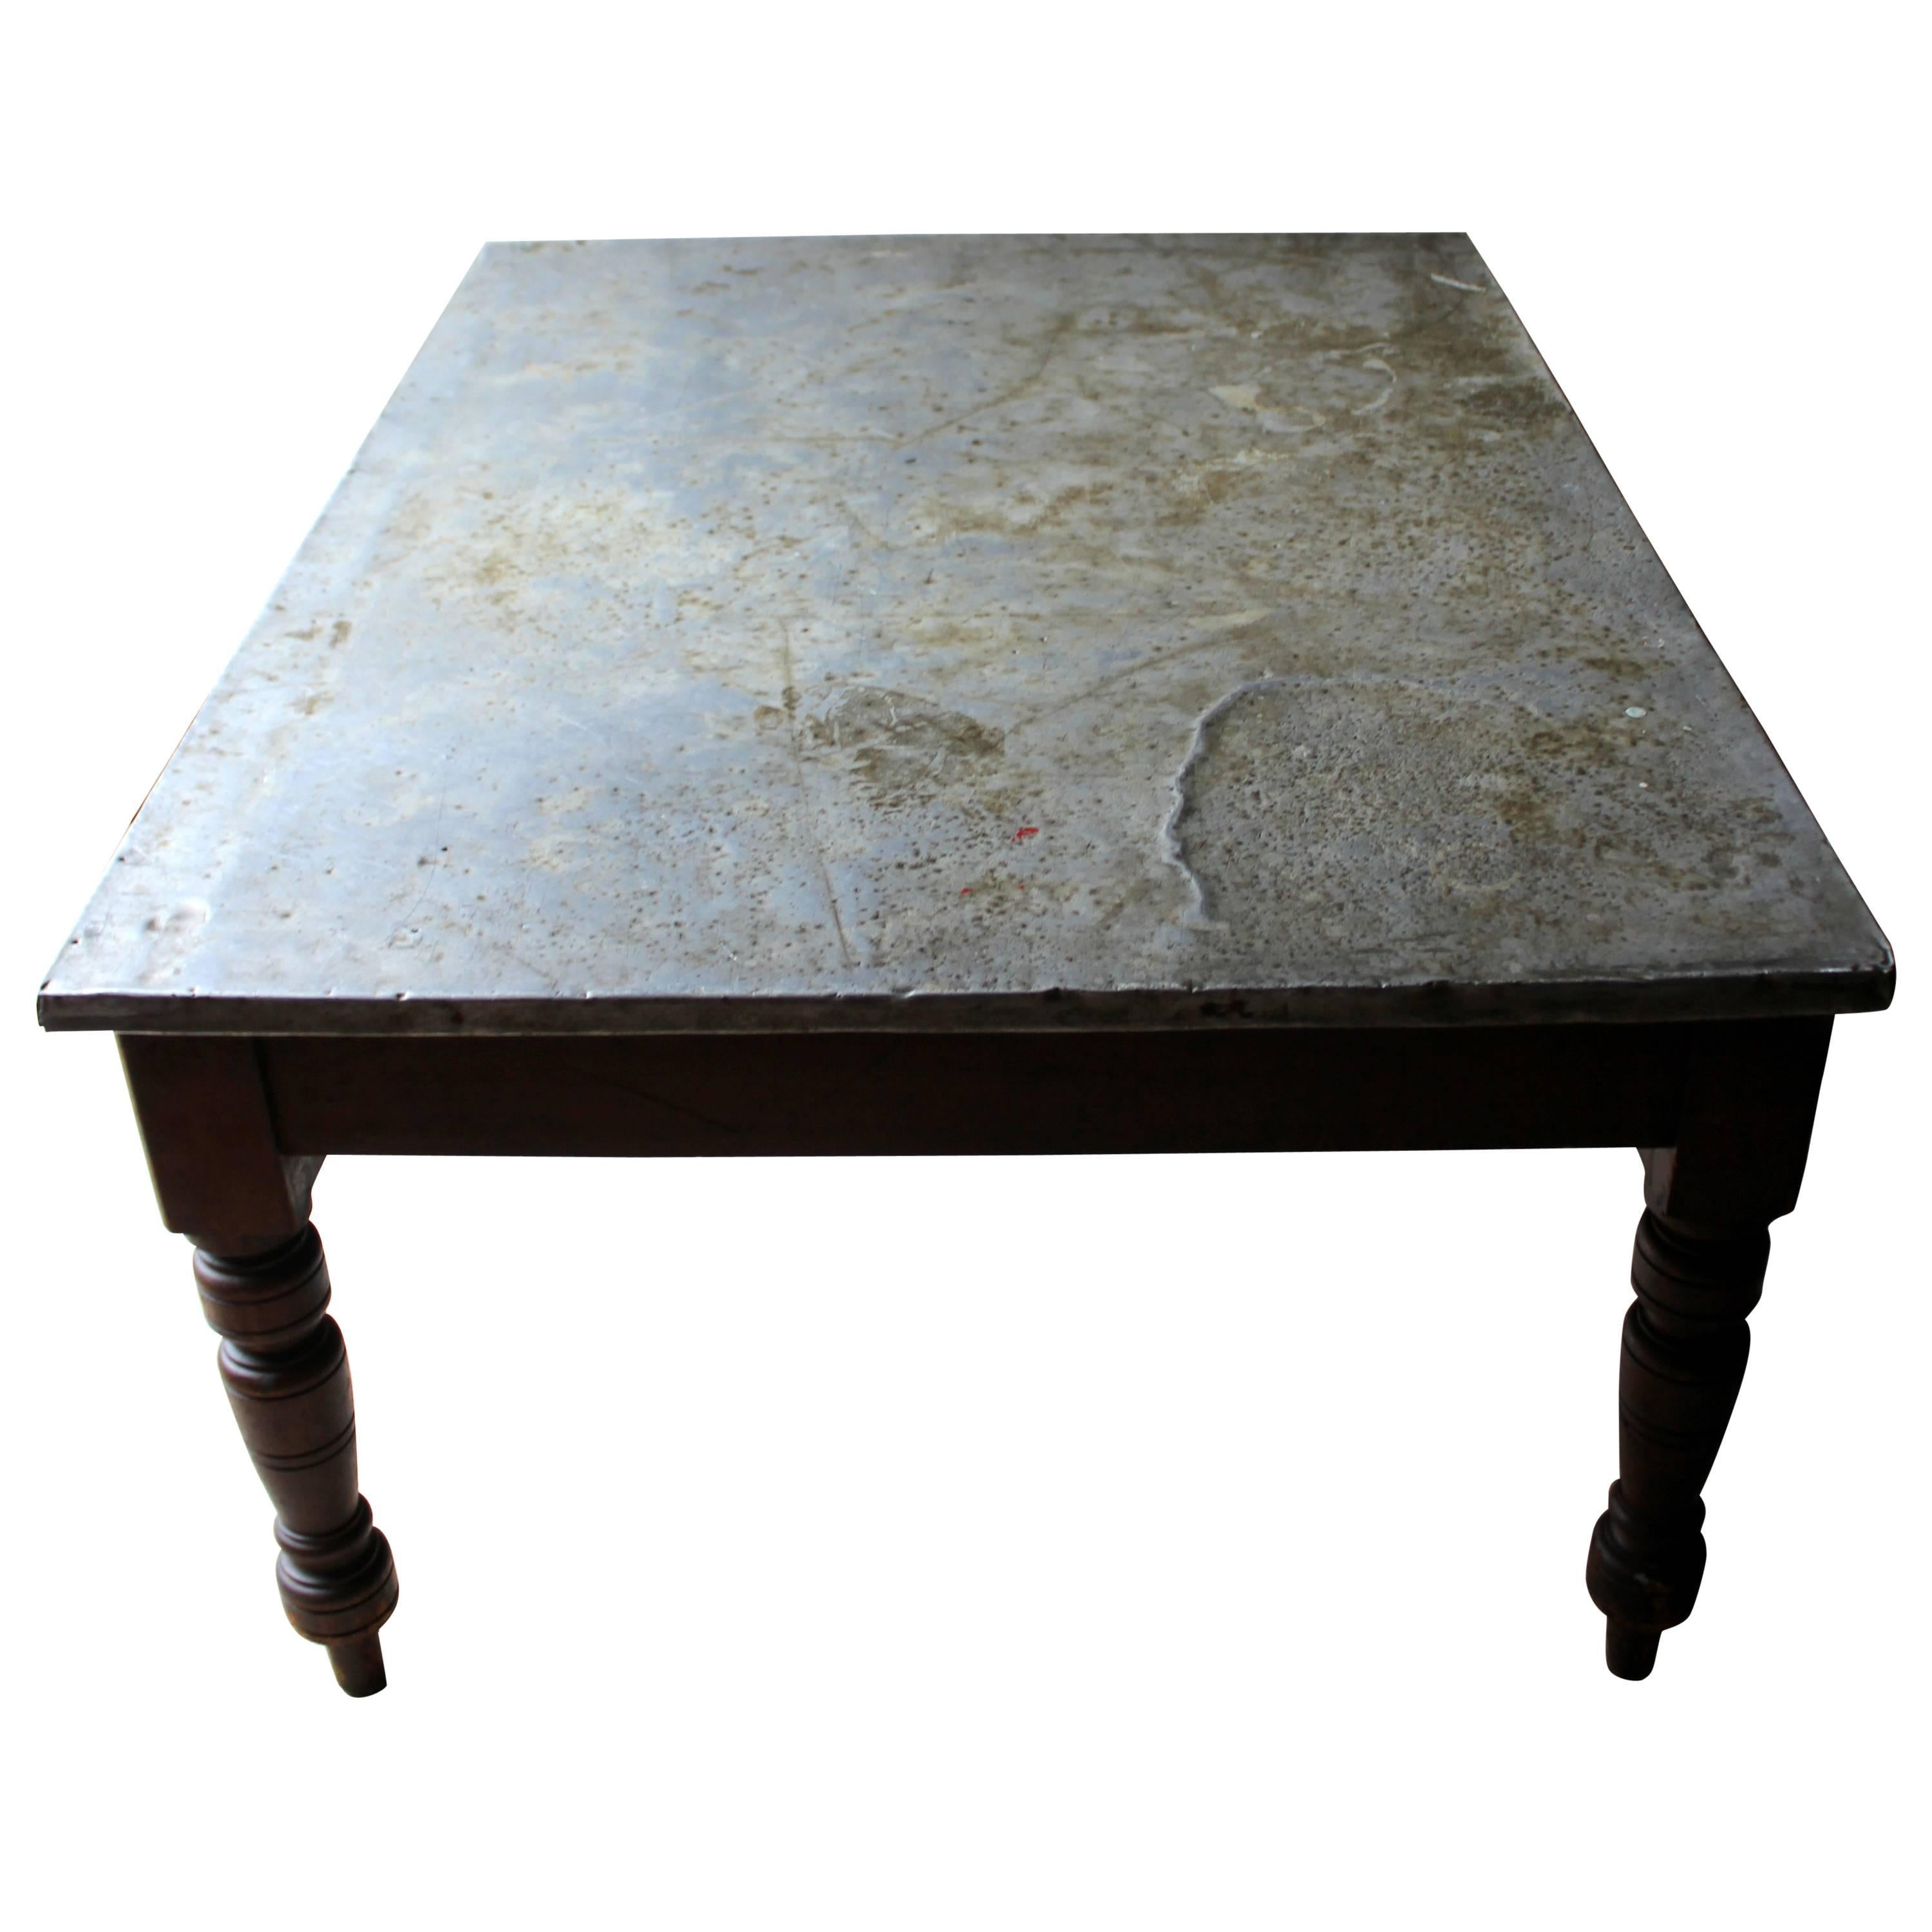 Fabulous 19th Century Victorian Pine and Zinc Topped Table, Circa 1870-1880